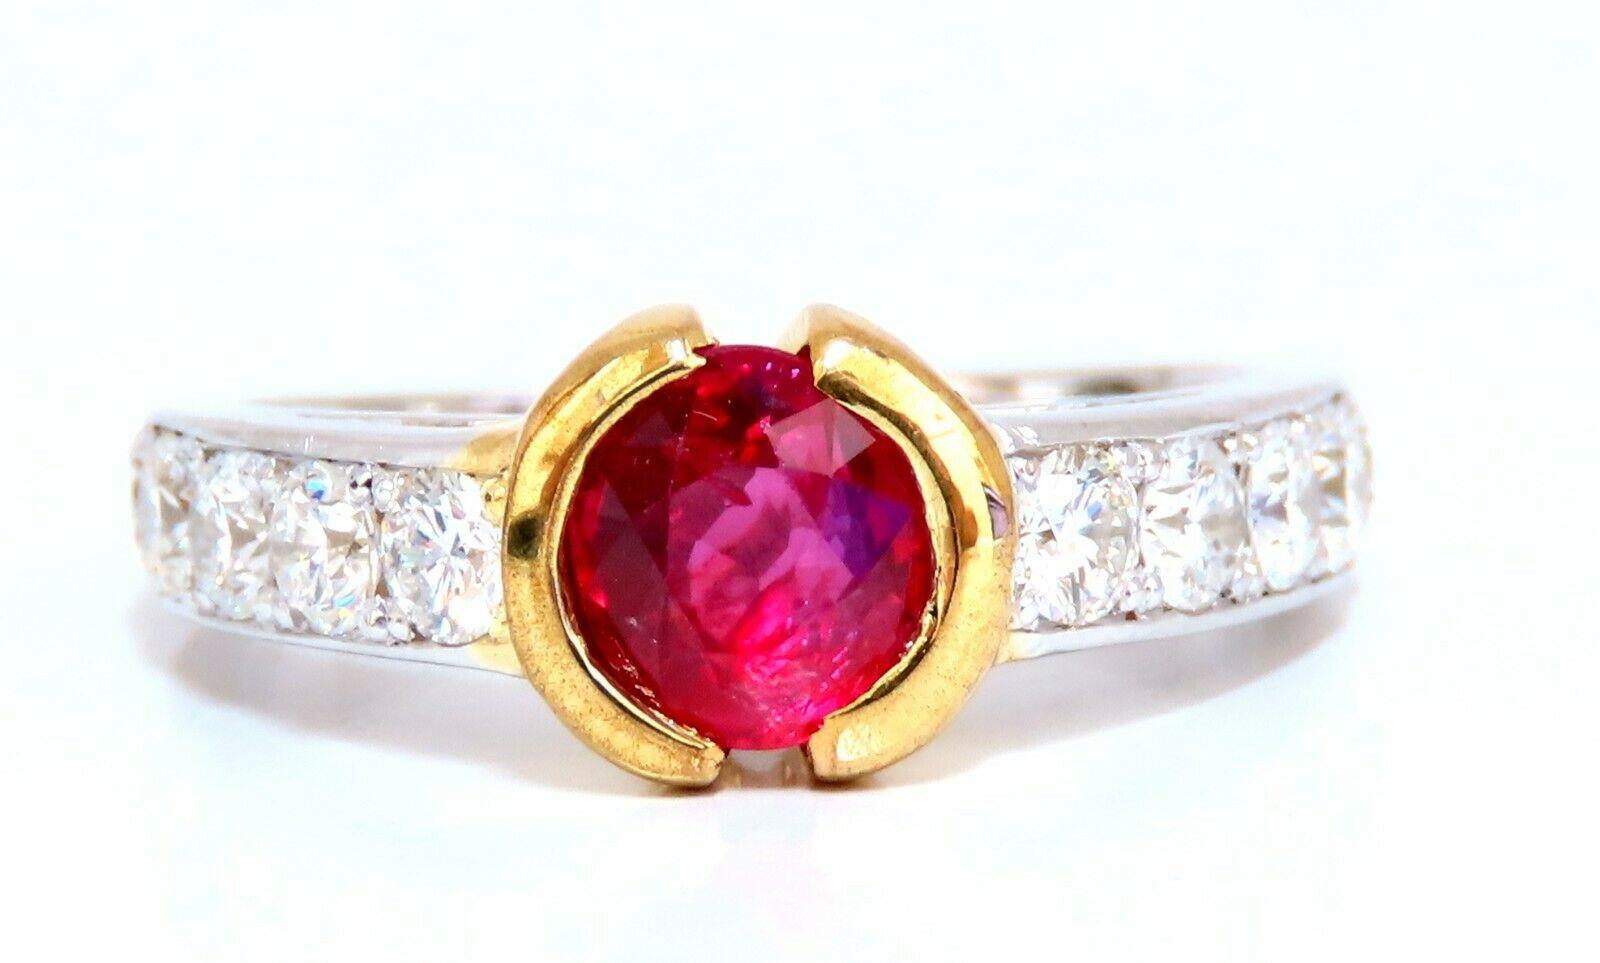 GIA Certified Ruby Accent Ring.

1.10ct. GIA Oval Bright Red Ruby

Report: 5192782950

(VS) Clean Clarity & Transparent.

6.49 X 5.58 X 3.46mm

GIA: No Heat



.86ct side round diamonds.

Vs-2 clarity, G color.

14kt white gold

5.4 grams.

current